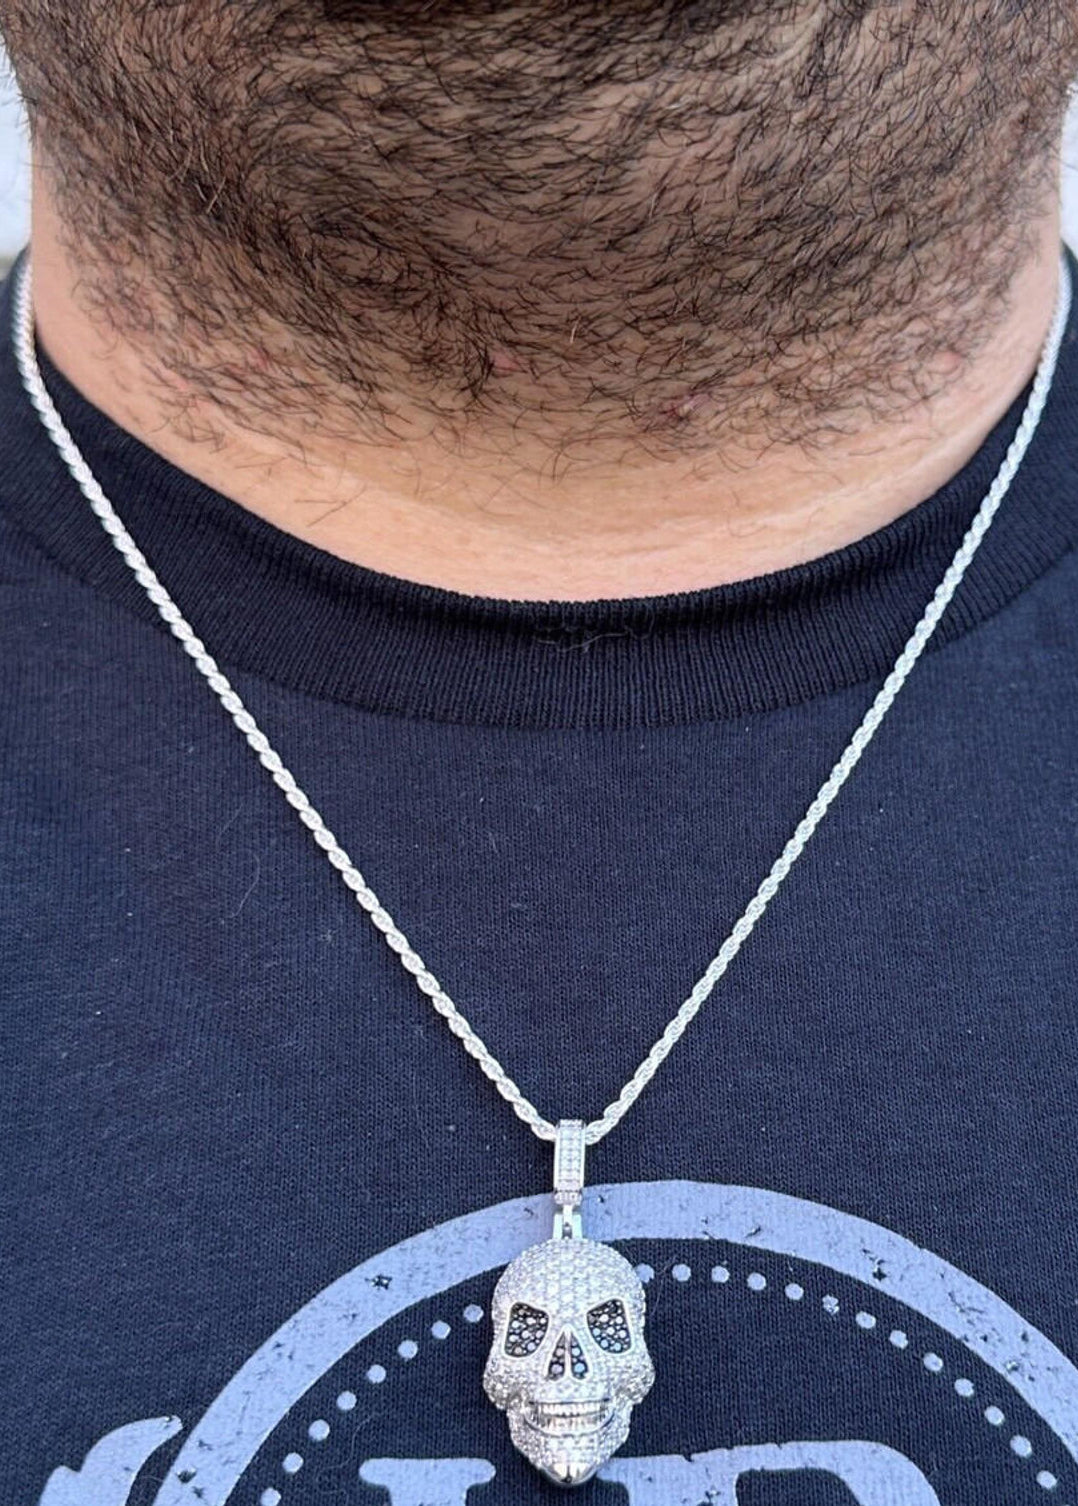 A Men Wearing 14k White Gold Skull Pendant Necklace with White & Black Moissanite Stones with 14k White Gold Twisted Rope Chain 